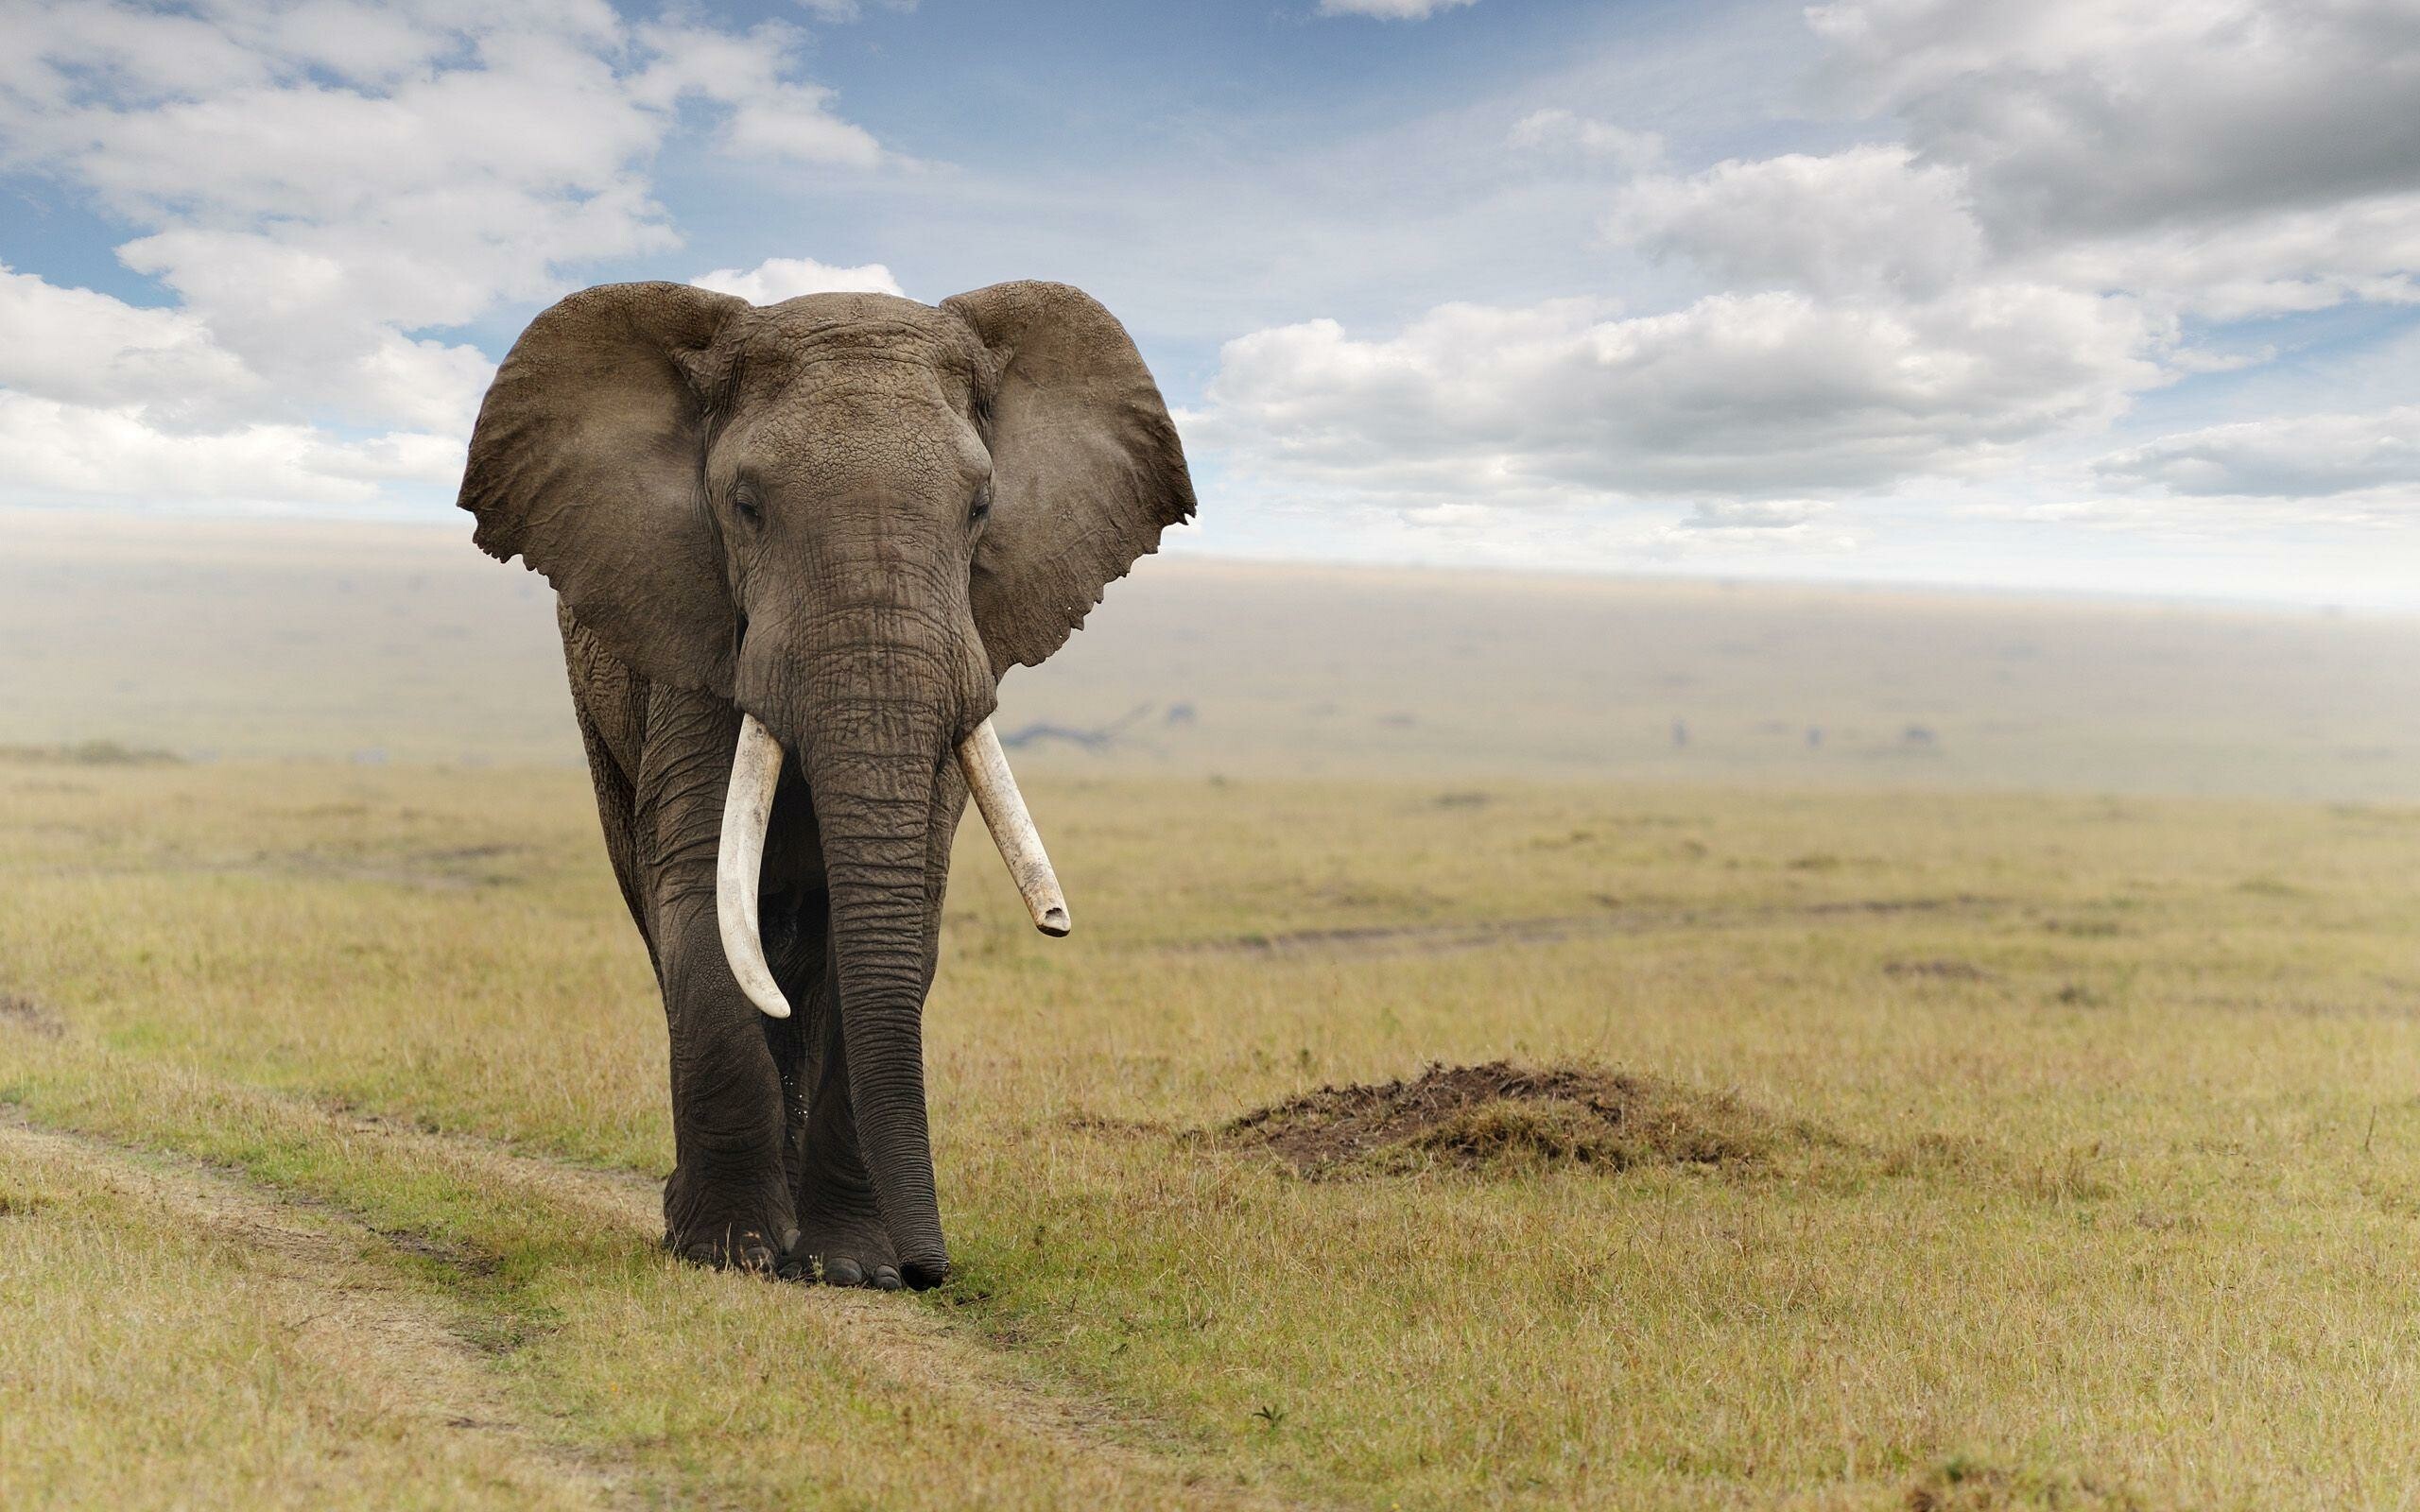 Elephant: Elephants can live up to 70 years in the wild. 2560x1600 HD Wallpaper.